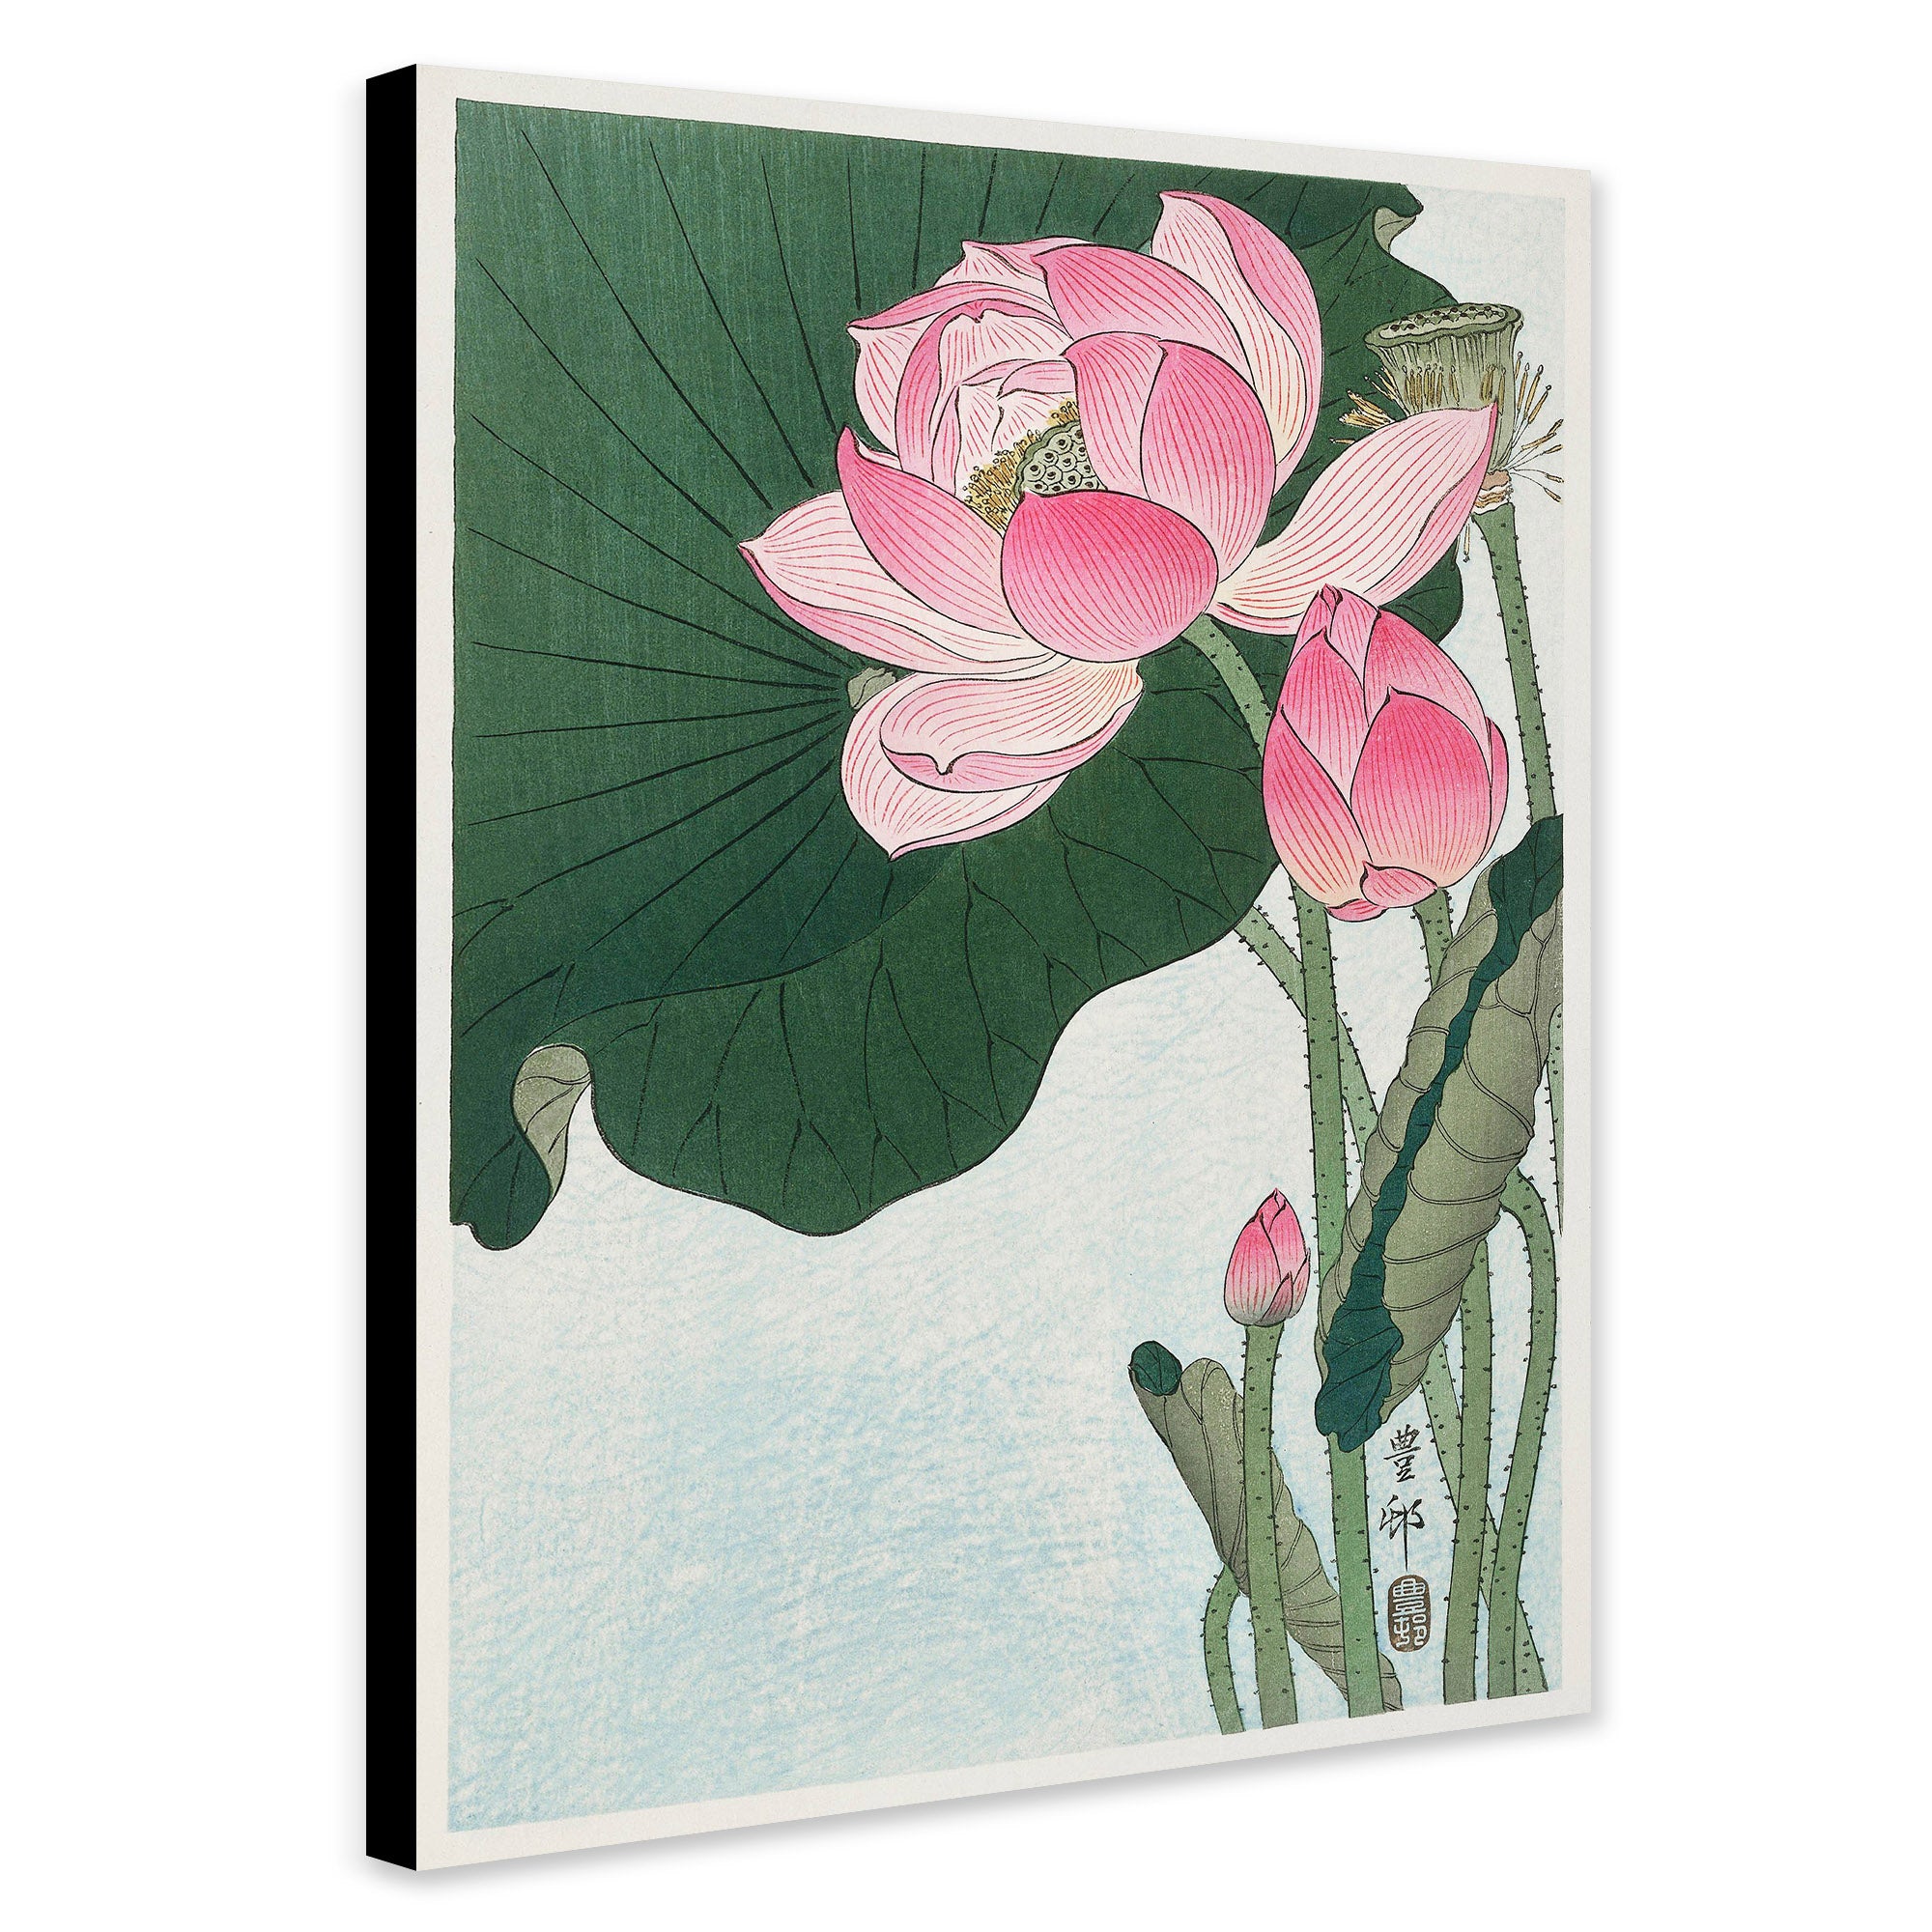 Blooming Lotus Flowers by Ohara Koson - Vintage Japanese Wall Art - Canvas Wall Art Framed  Print - Various Sizes